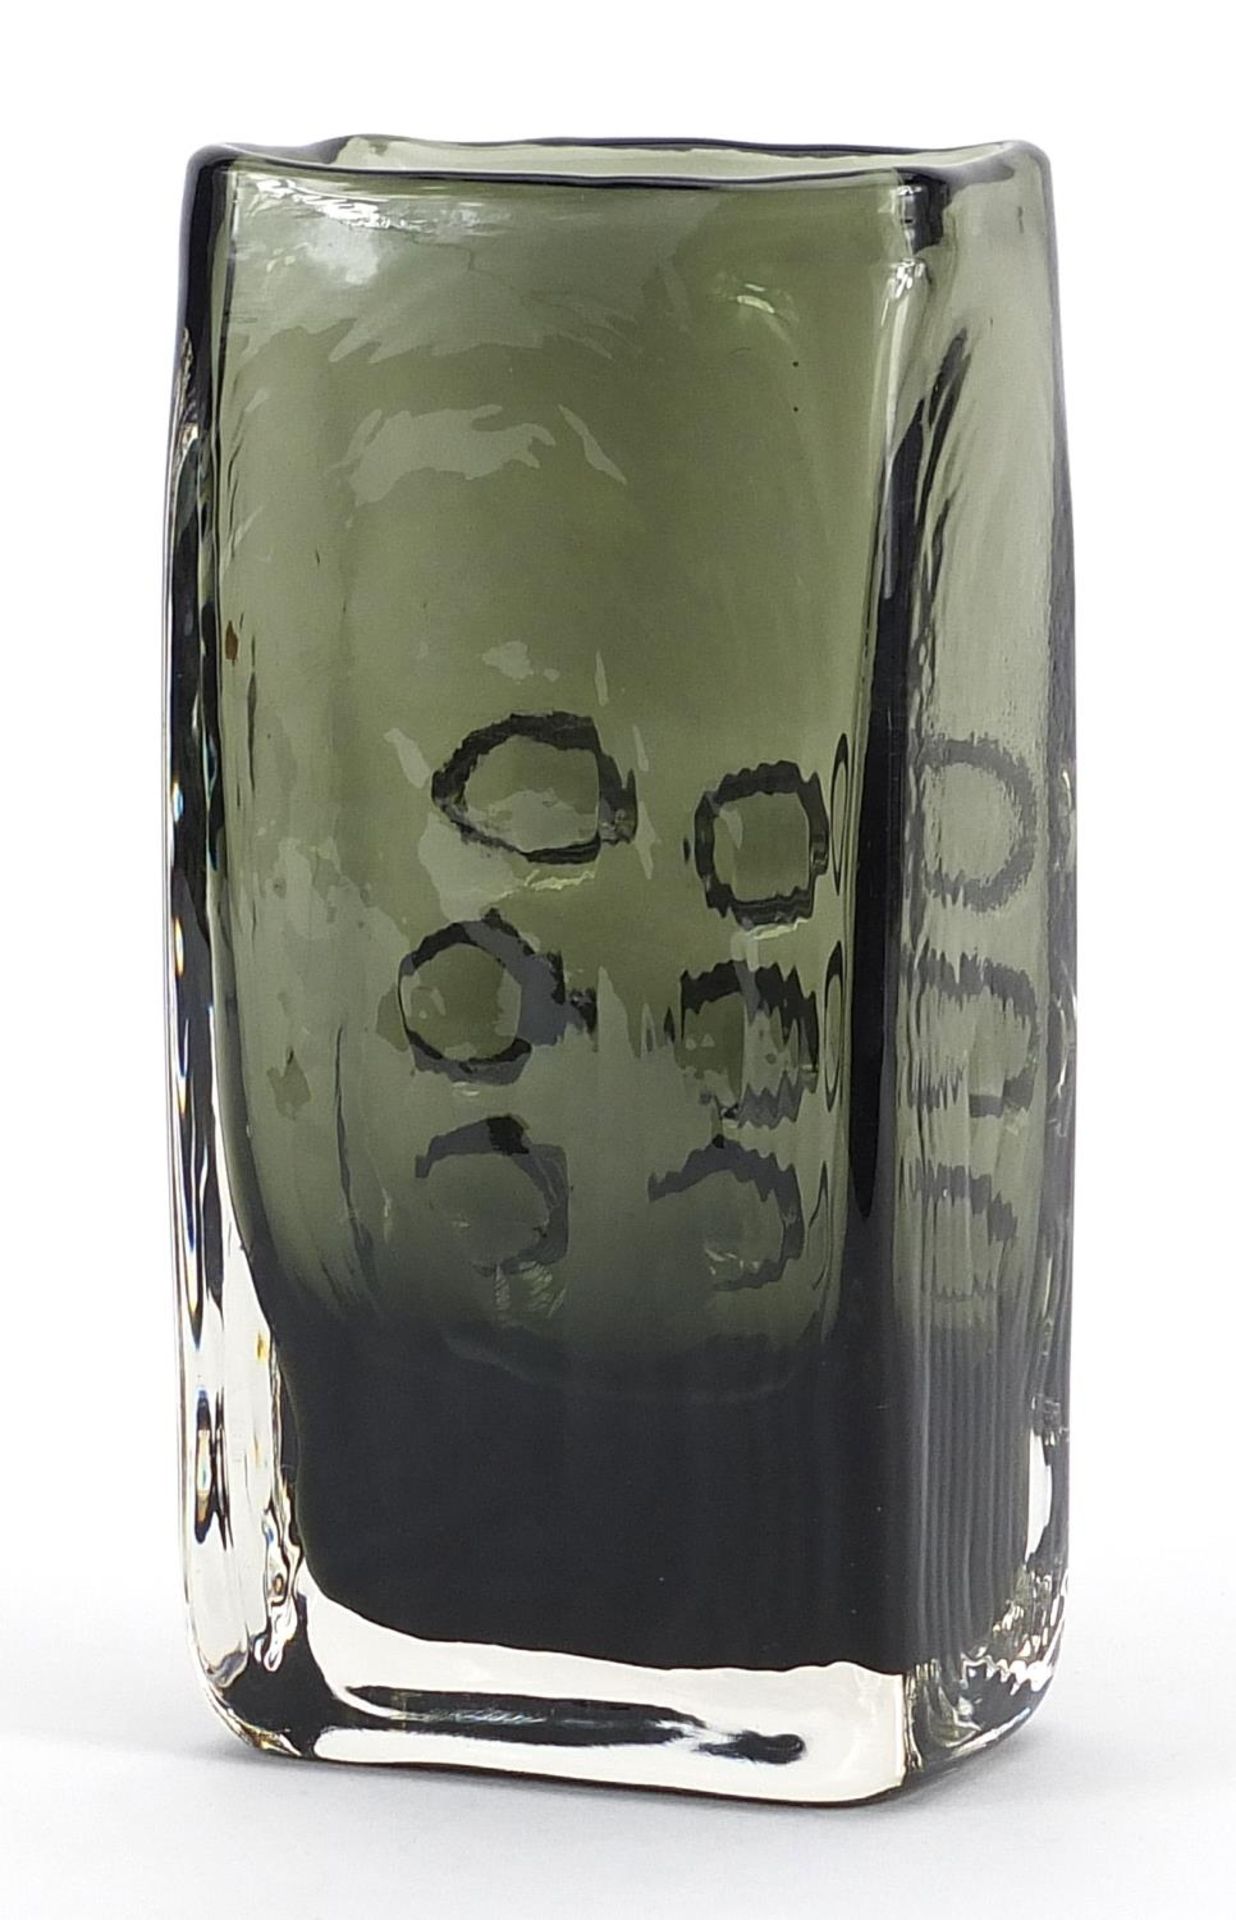 Geoffrey Baxter for Whitefriars, mobile phone glass vase in sage green, 16.5cm high - Image 2 of 3